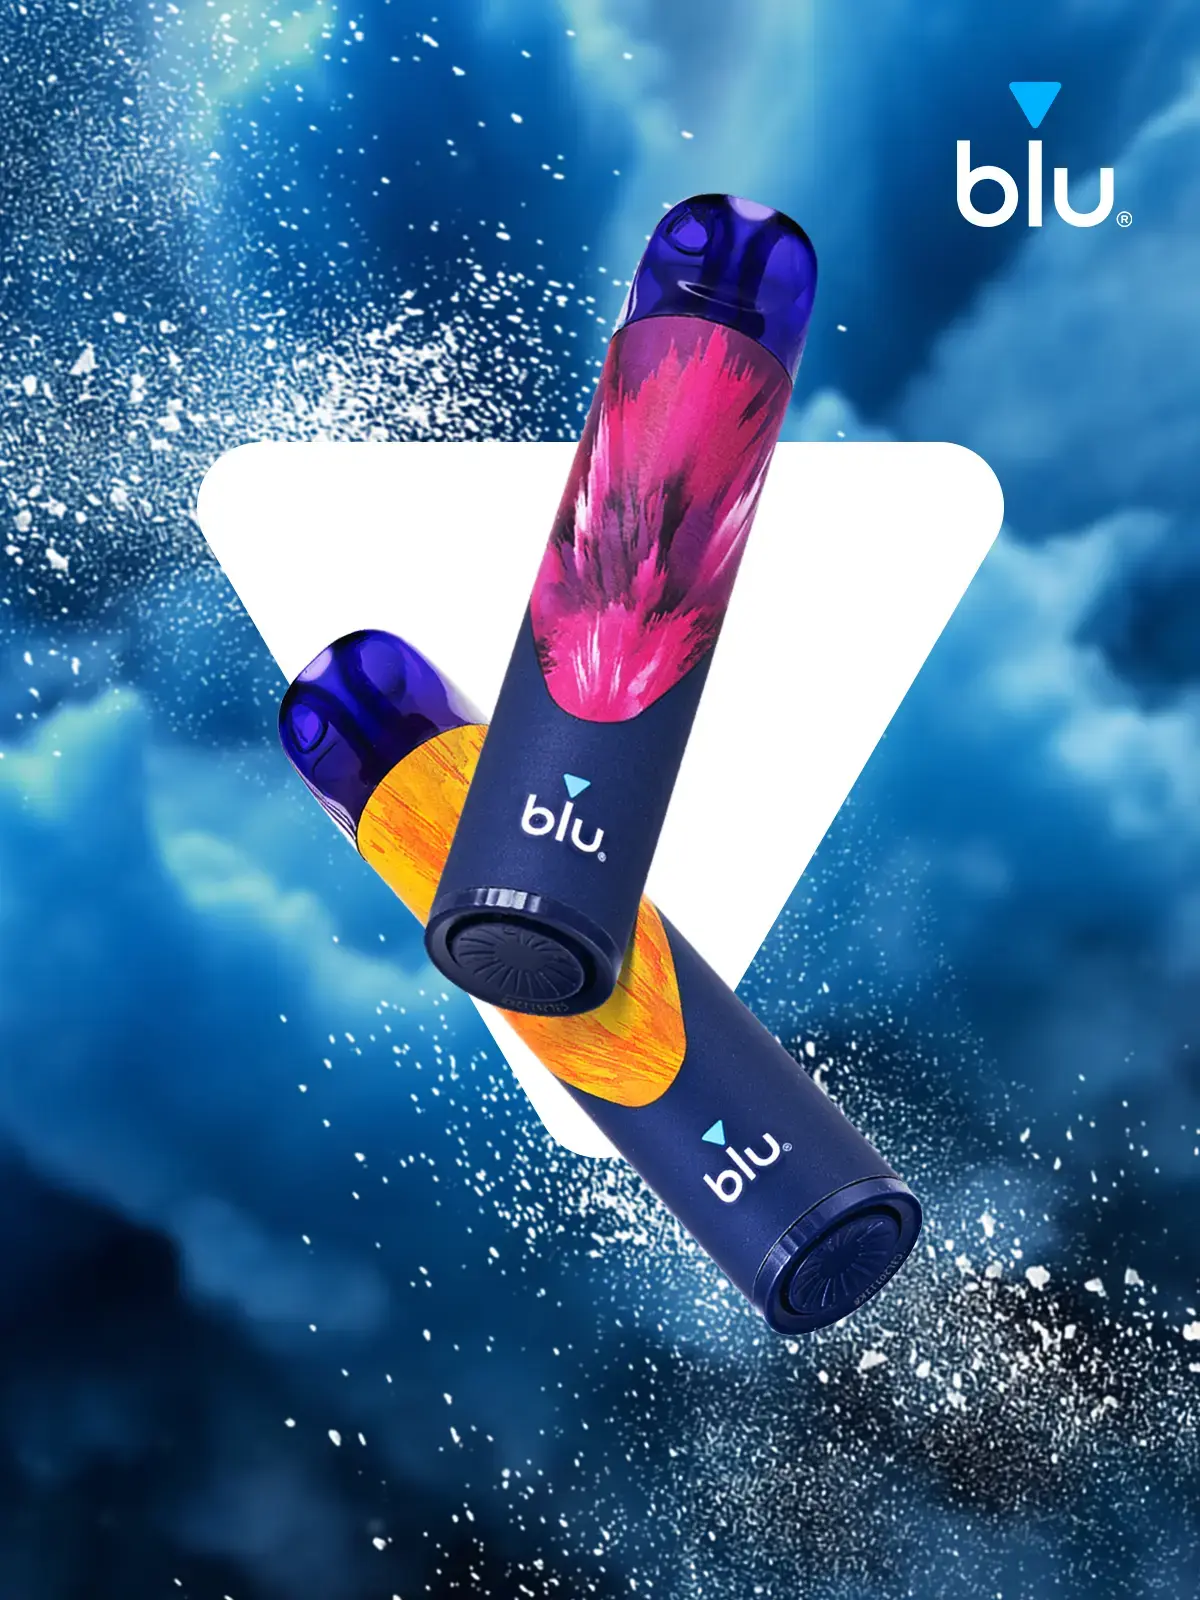 Two blu Bar 1000 disposable vapes floating in front of a styled blue background